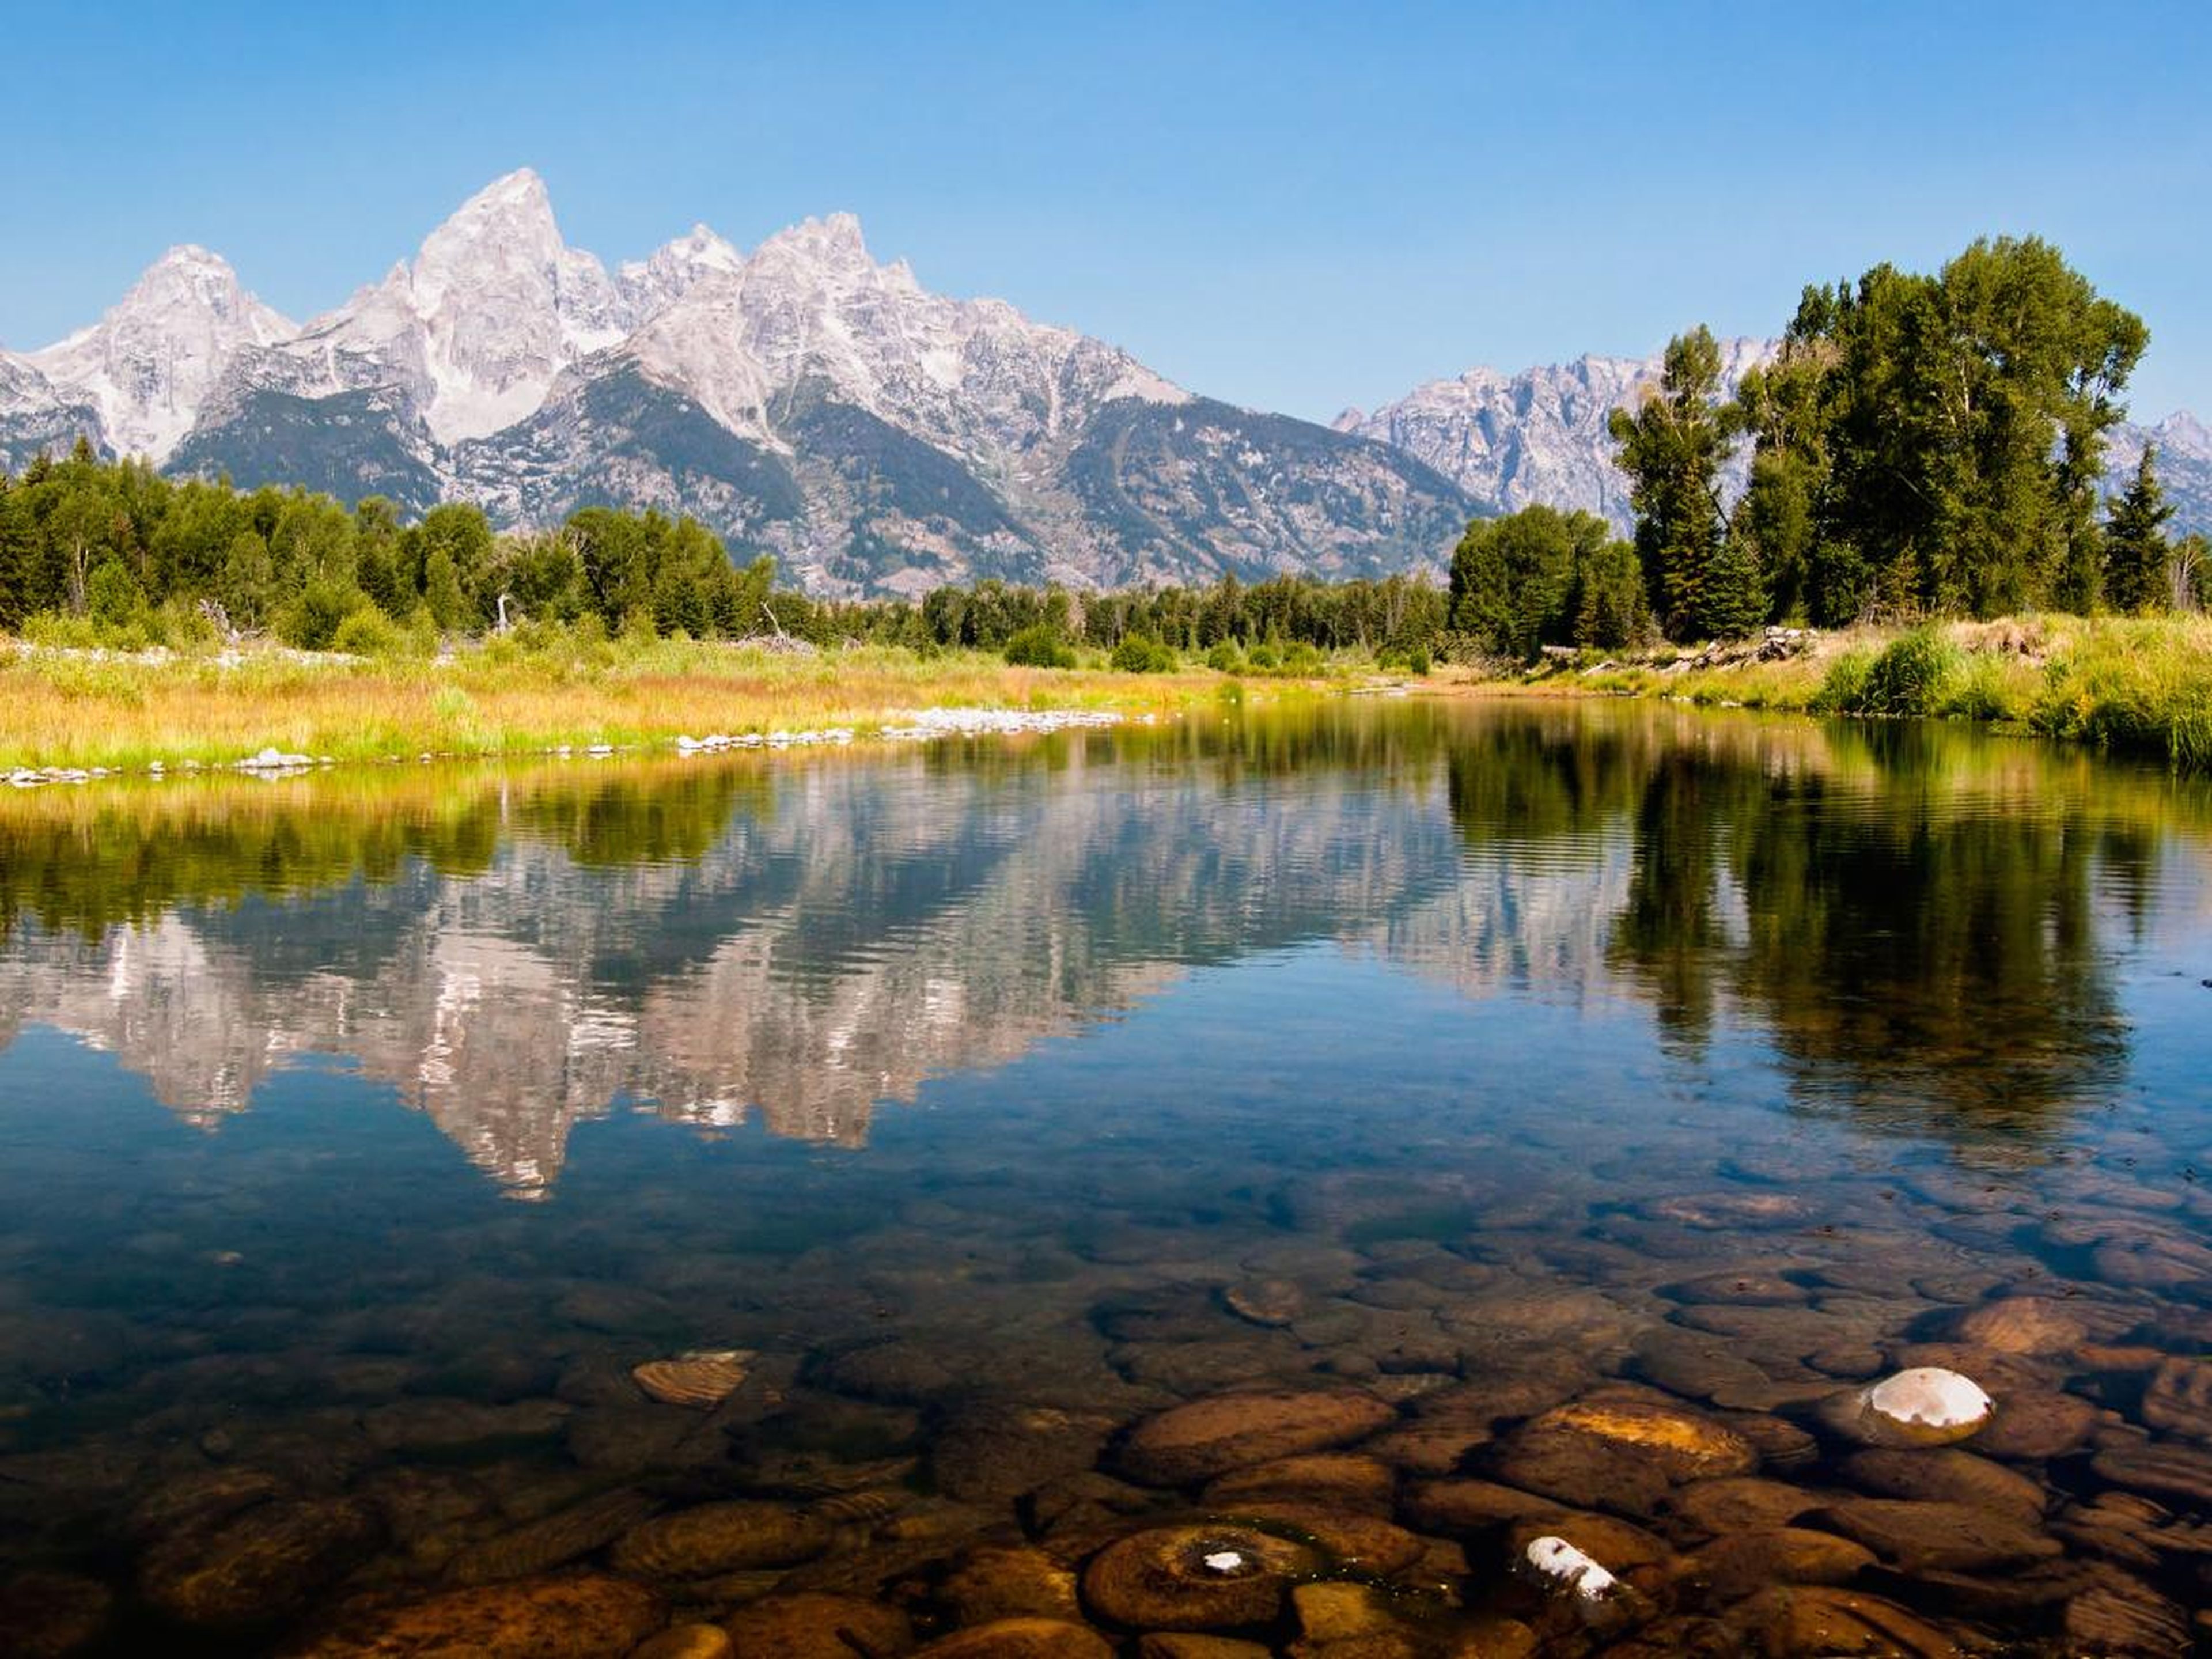 The Jackson Hole Travel & Tourism Board in Wyoming is asking Instagram users to stop geotagging its natural wonders altogether.